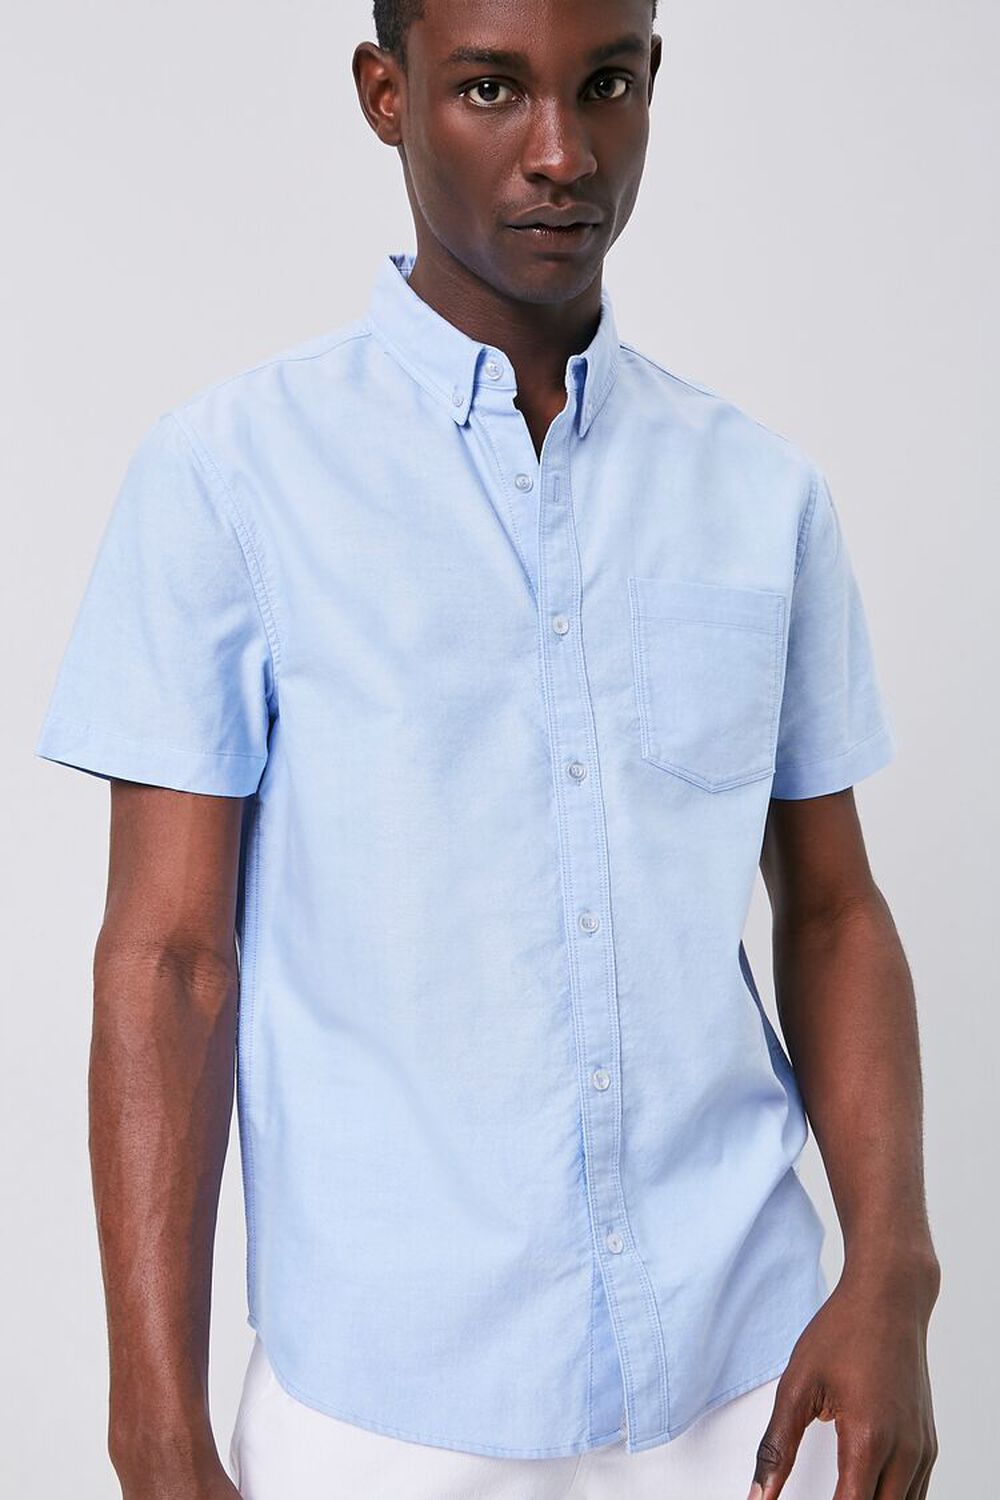 BLUE Fitted Oxford Pocket Shirt, image 1